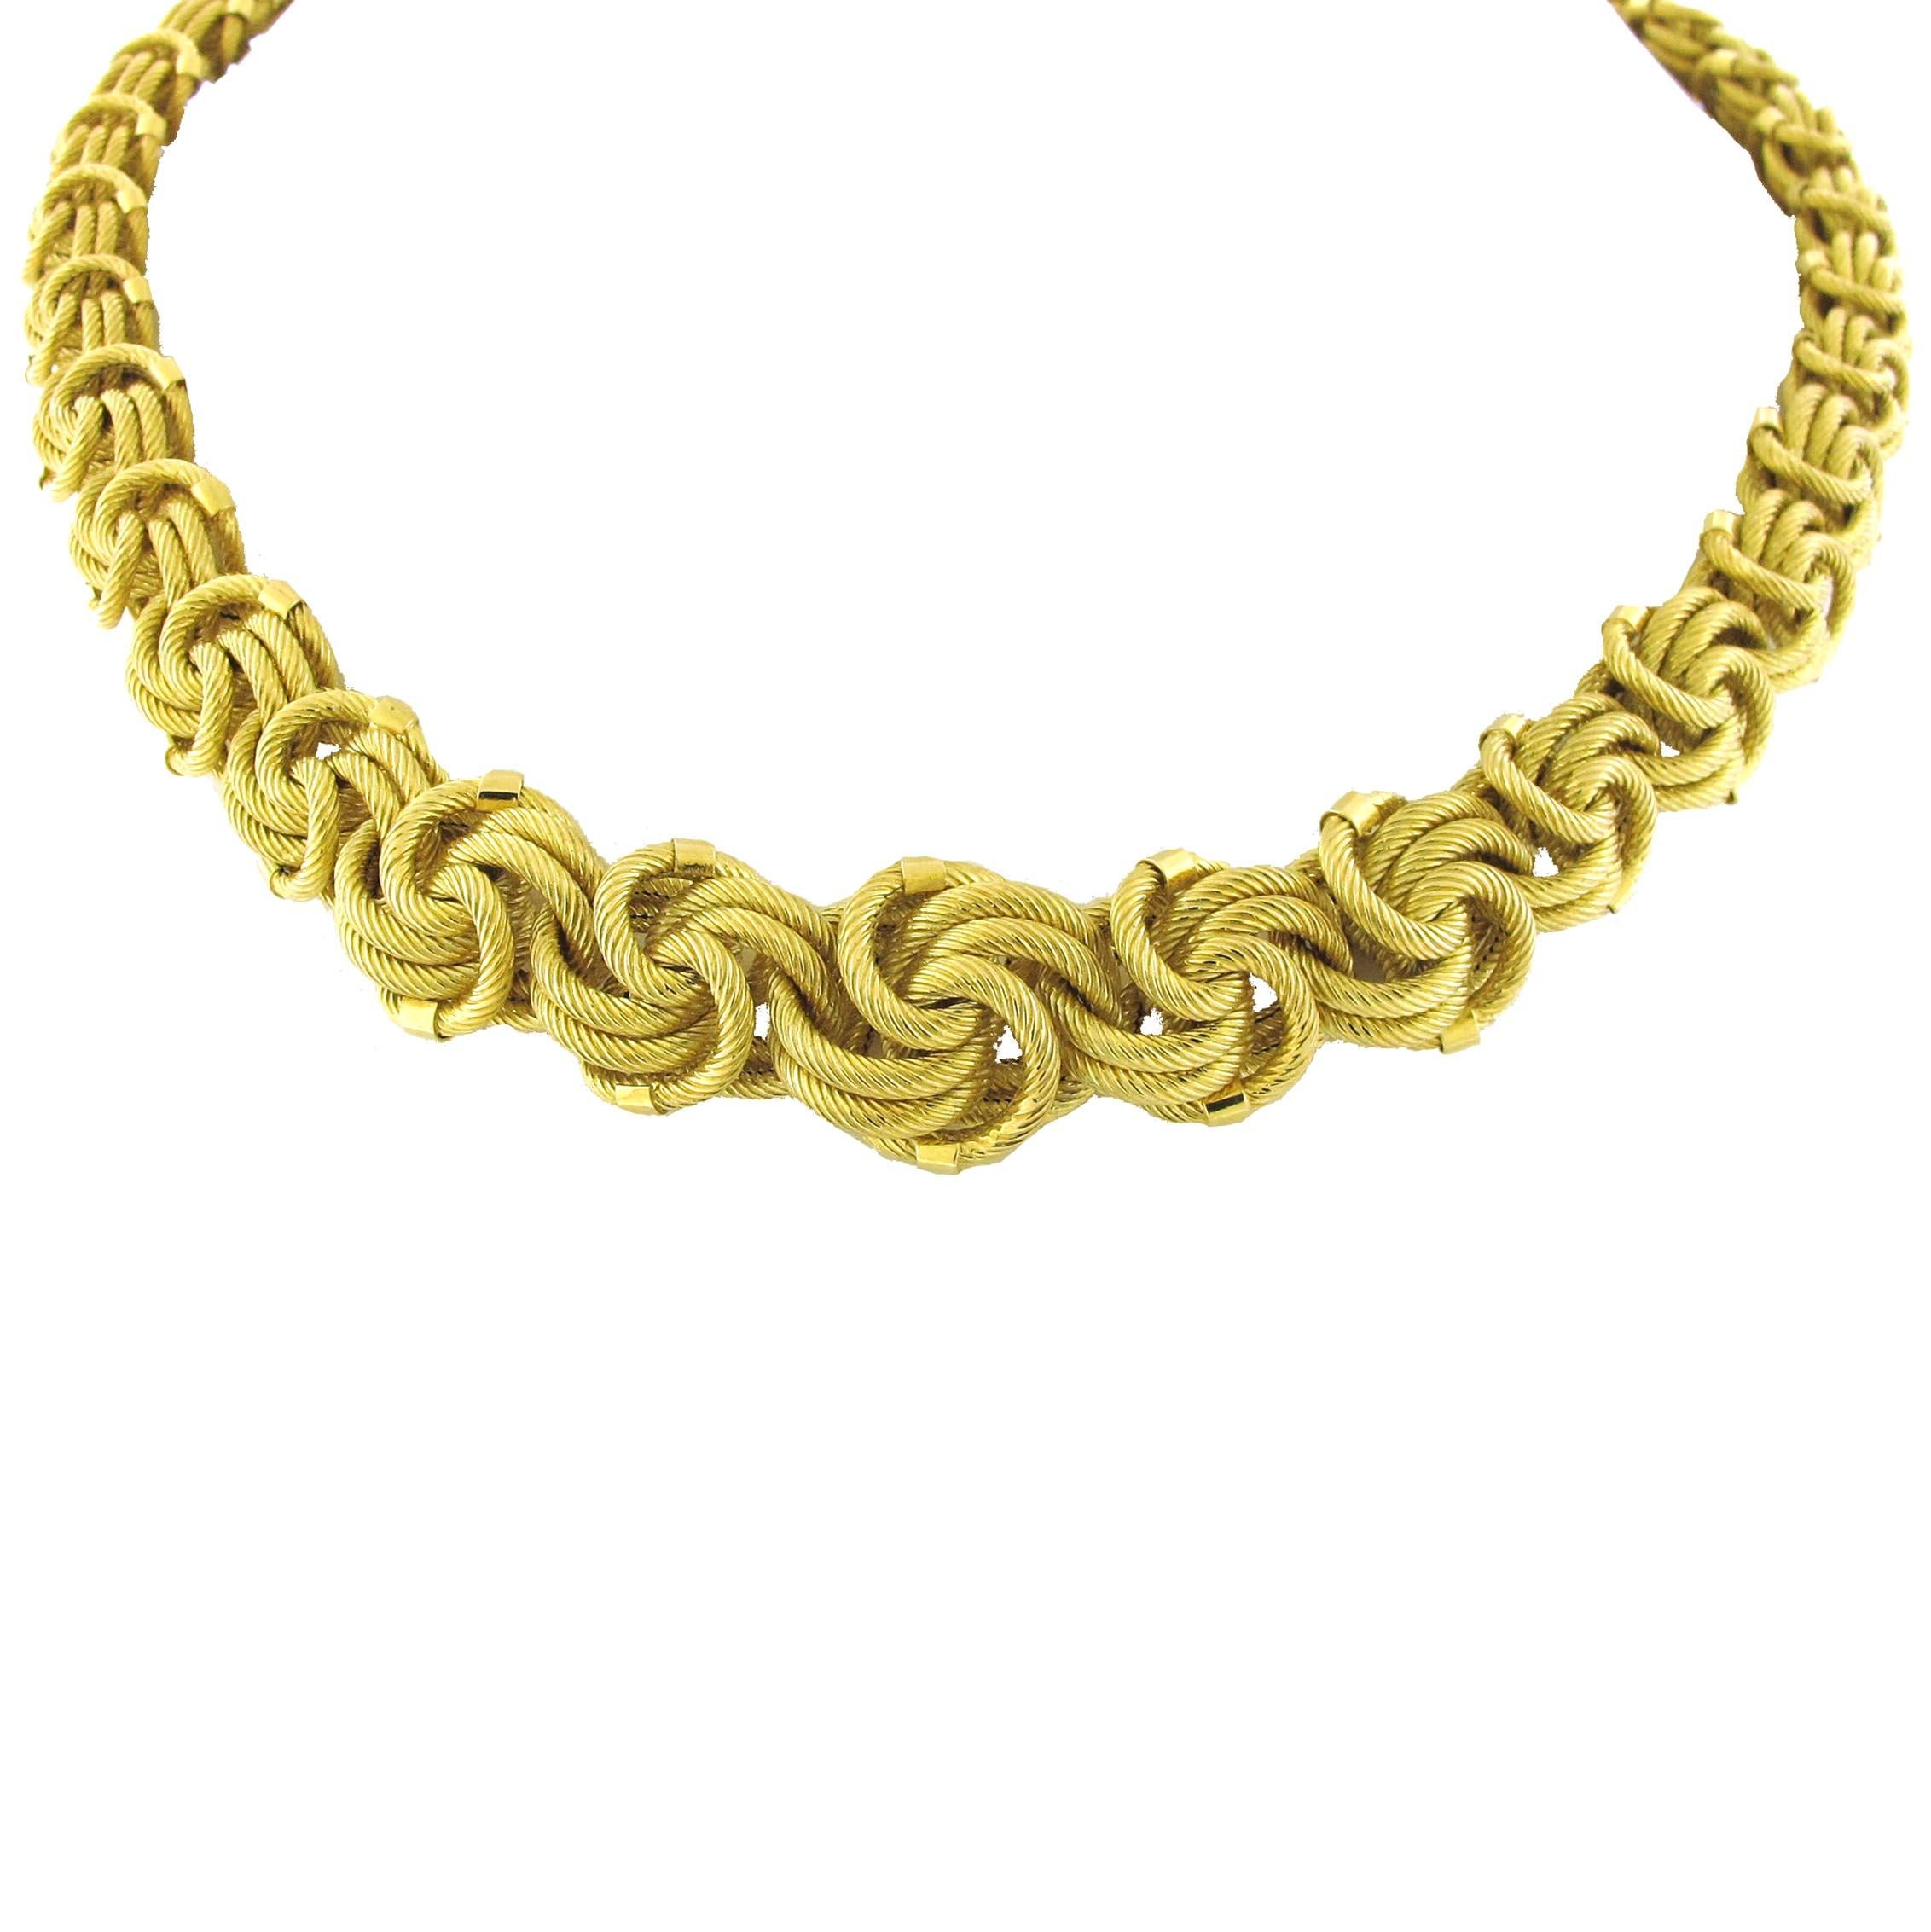 Such an exquisite necklace. This 18kt yellow gold chain necklace is extremely well made. The way it sits on the neck and how the different sides sparkle show this was made with care. Original owner spent nearly $15,000 on this necklace at a